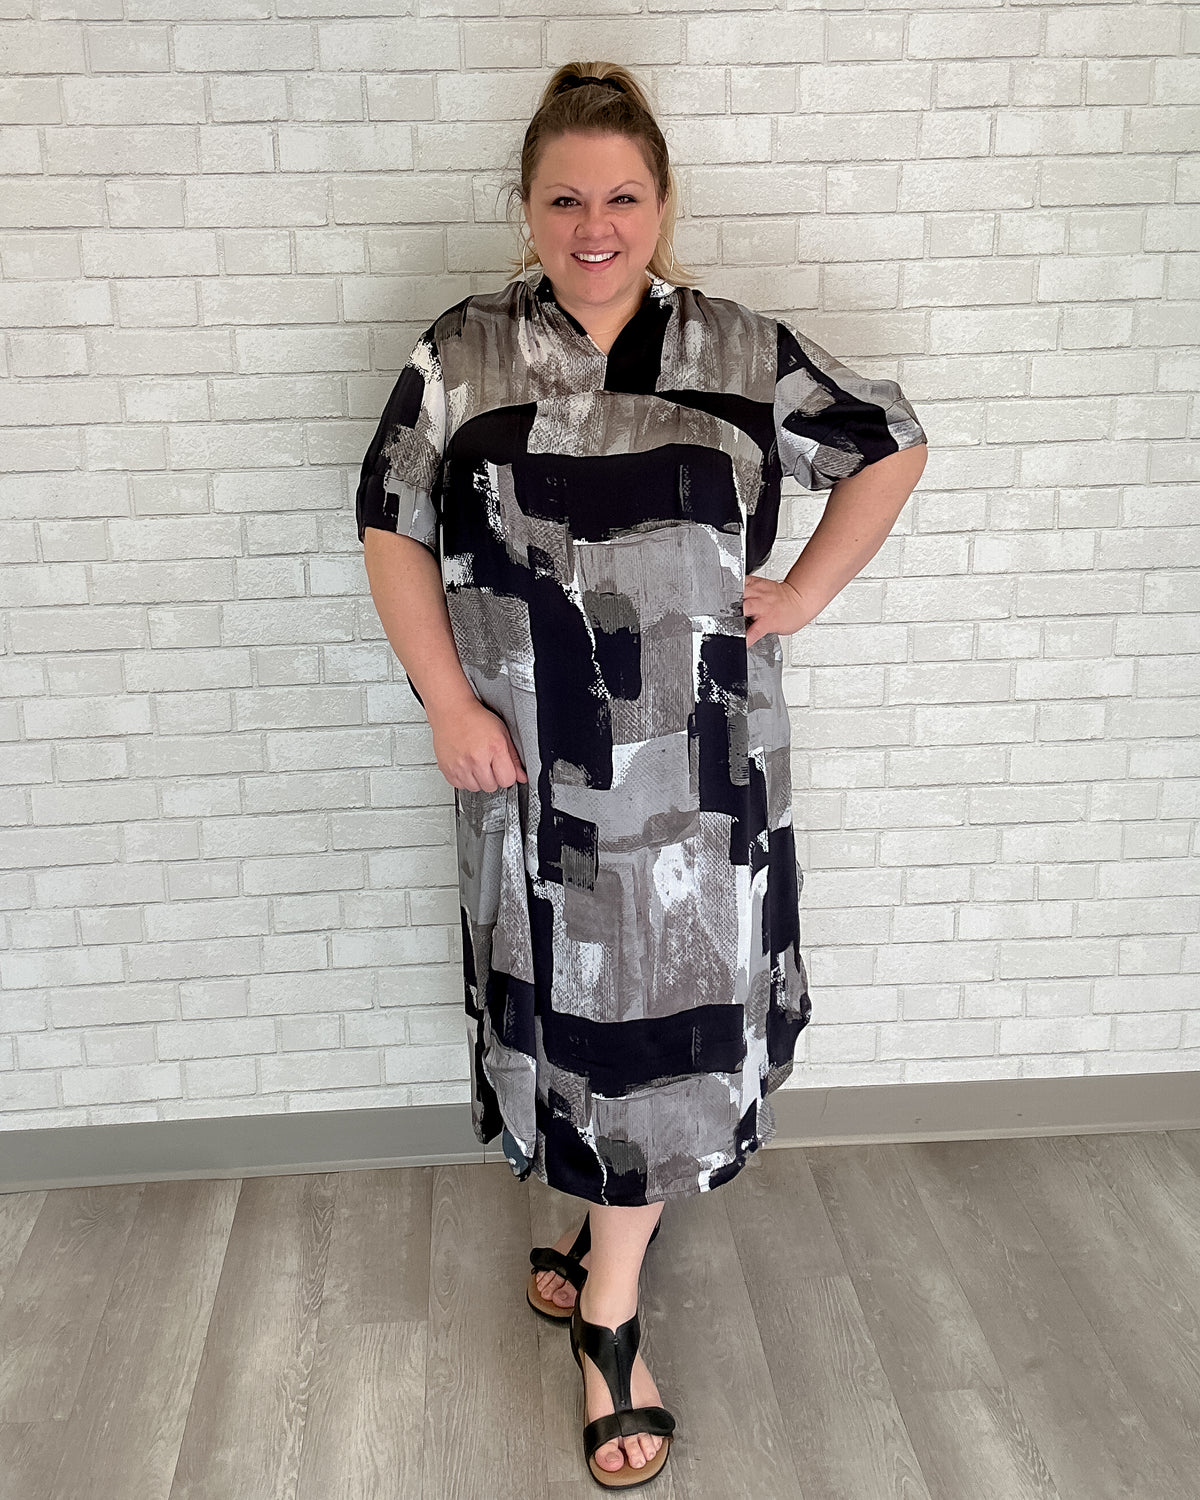 Abstract Greyscale Dress